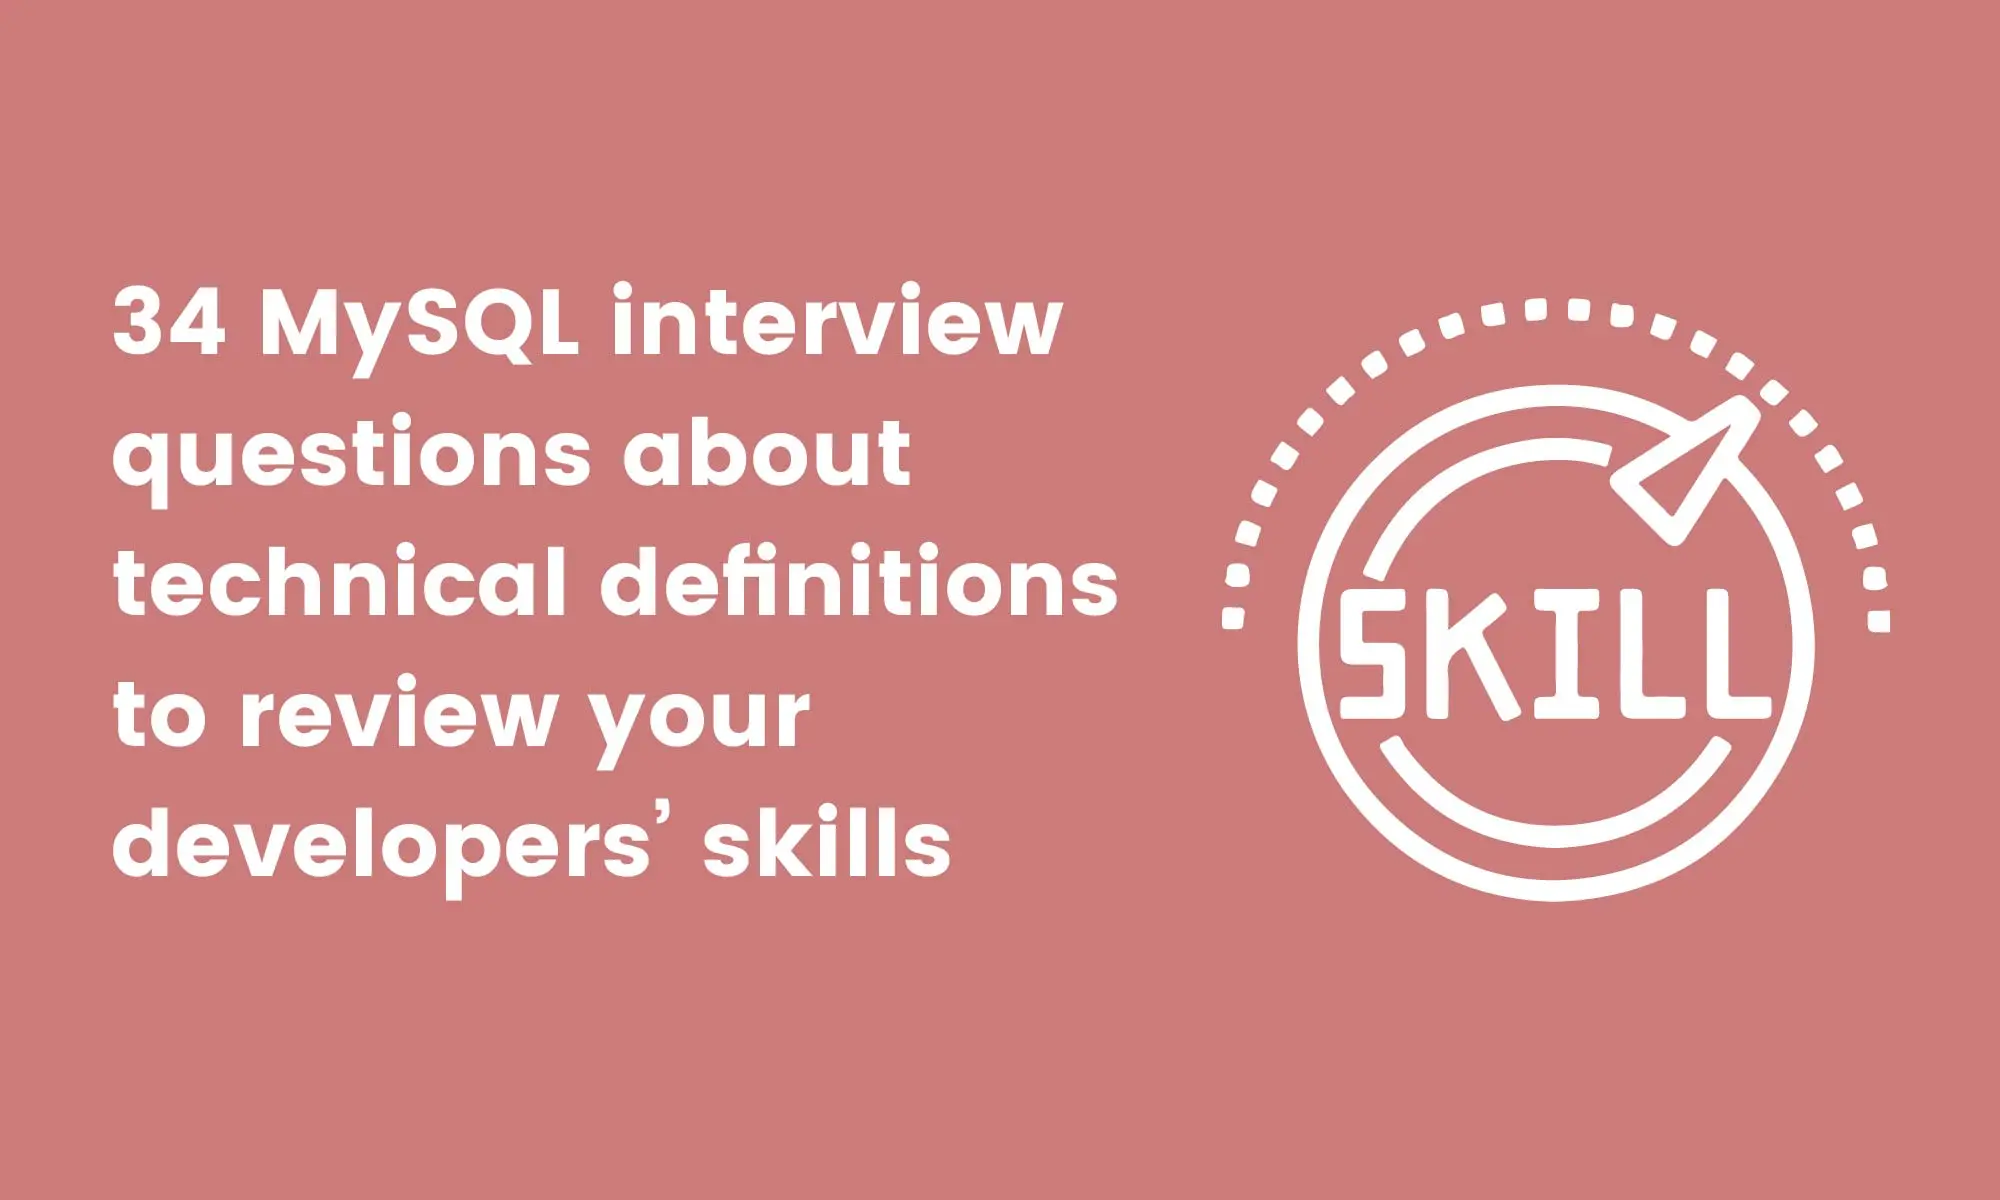 34 MySQL interview questions about technical definitions to review your developers’ skills 